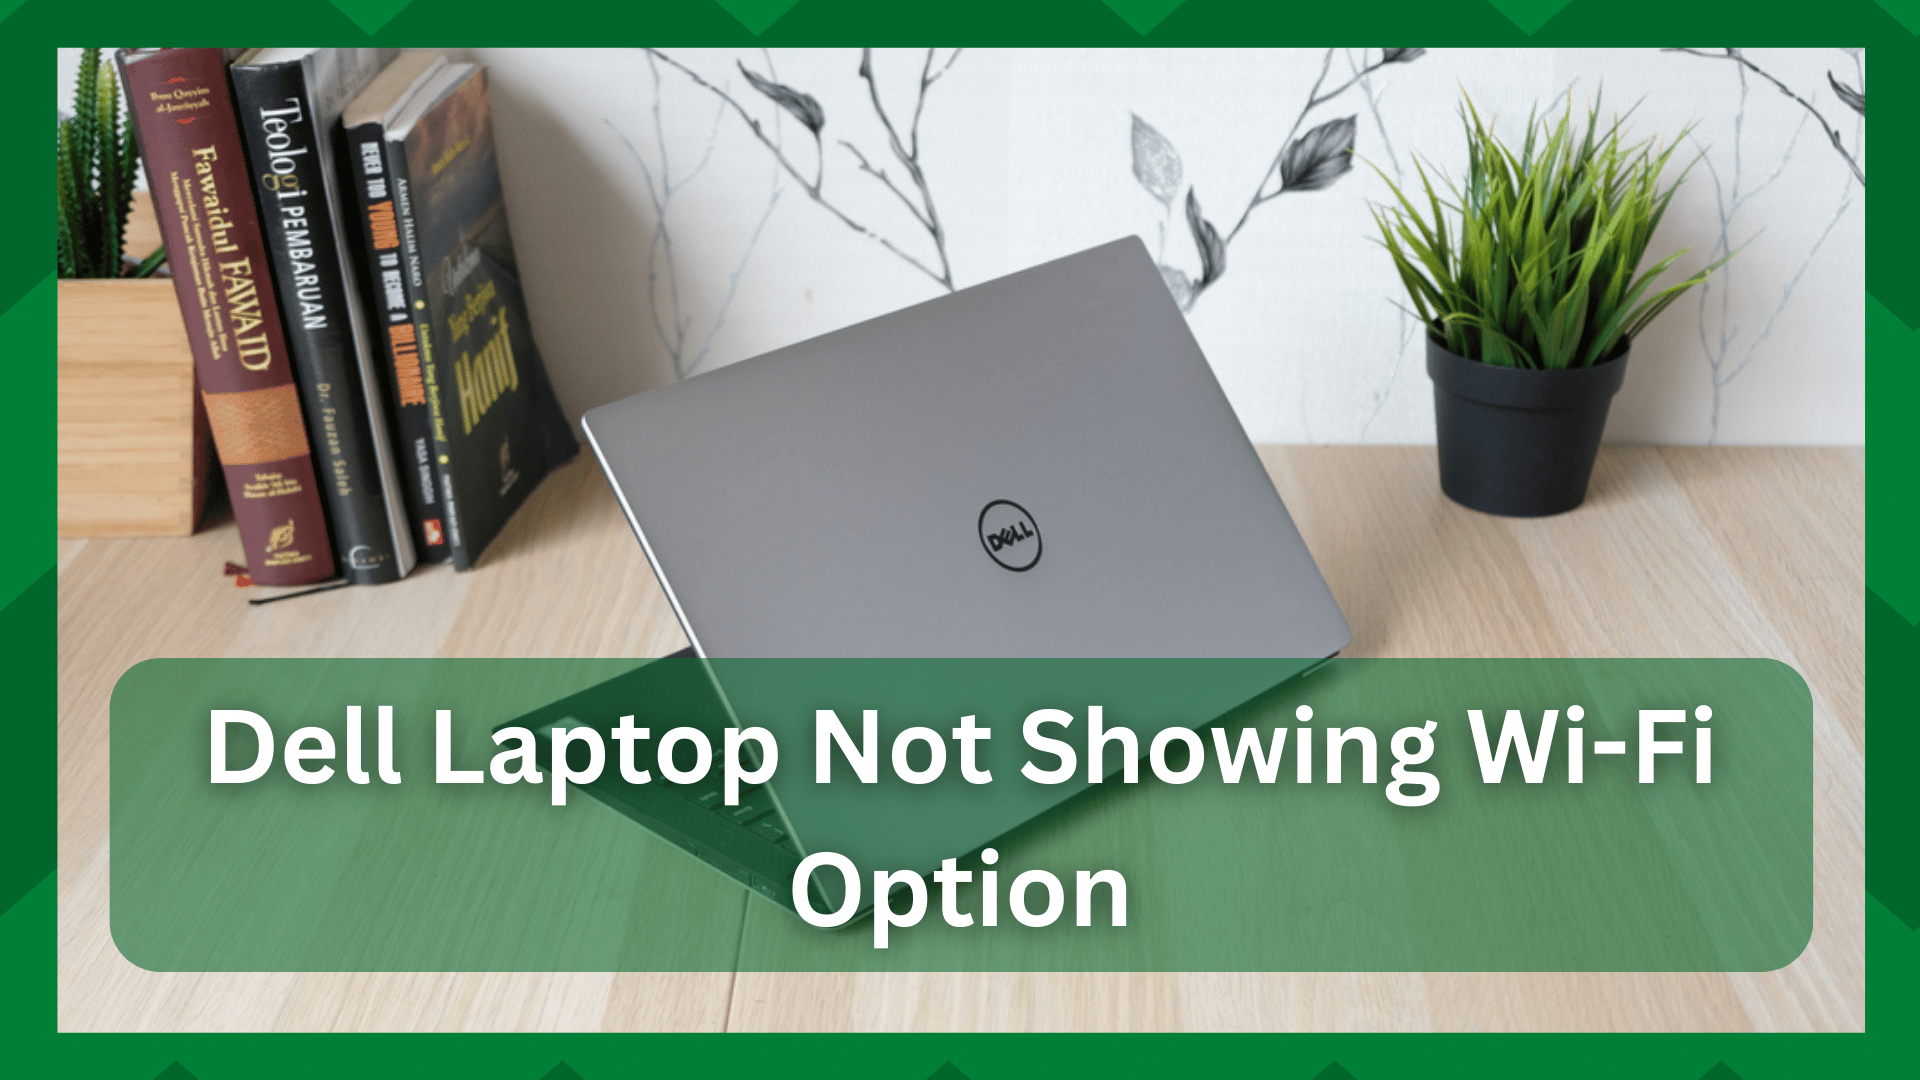 6 Fixes For DELL Laptop Not Showing Wi-Fi Option - Internet Access Guide